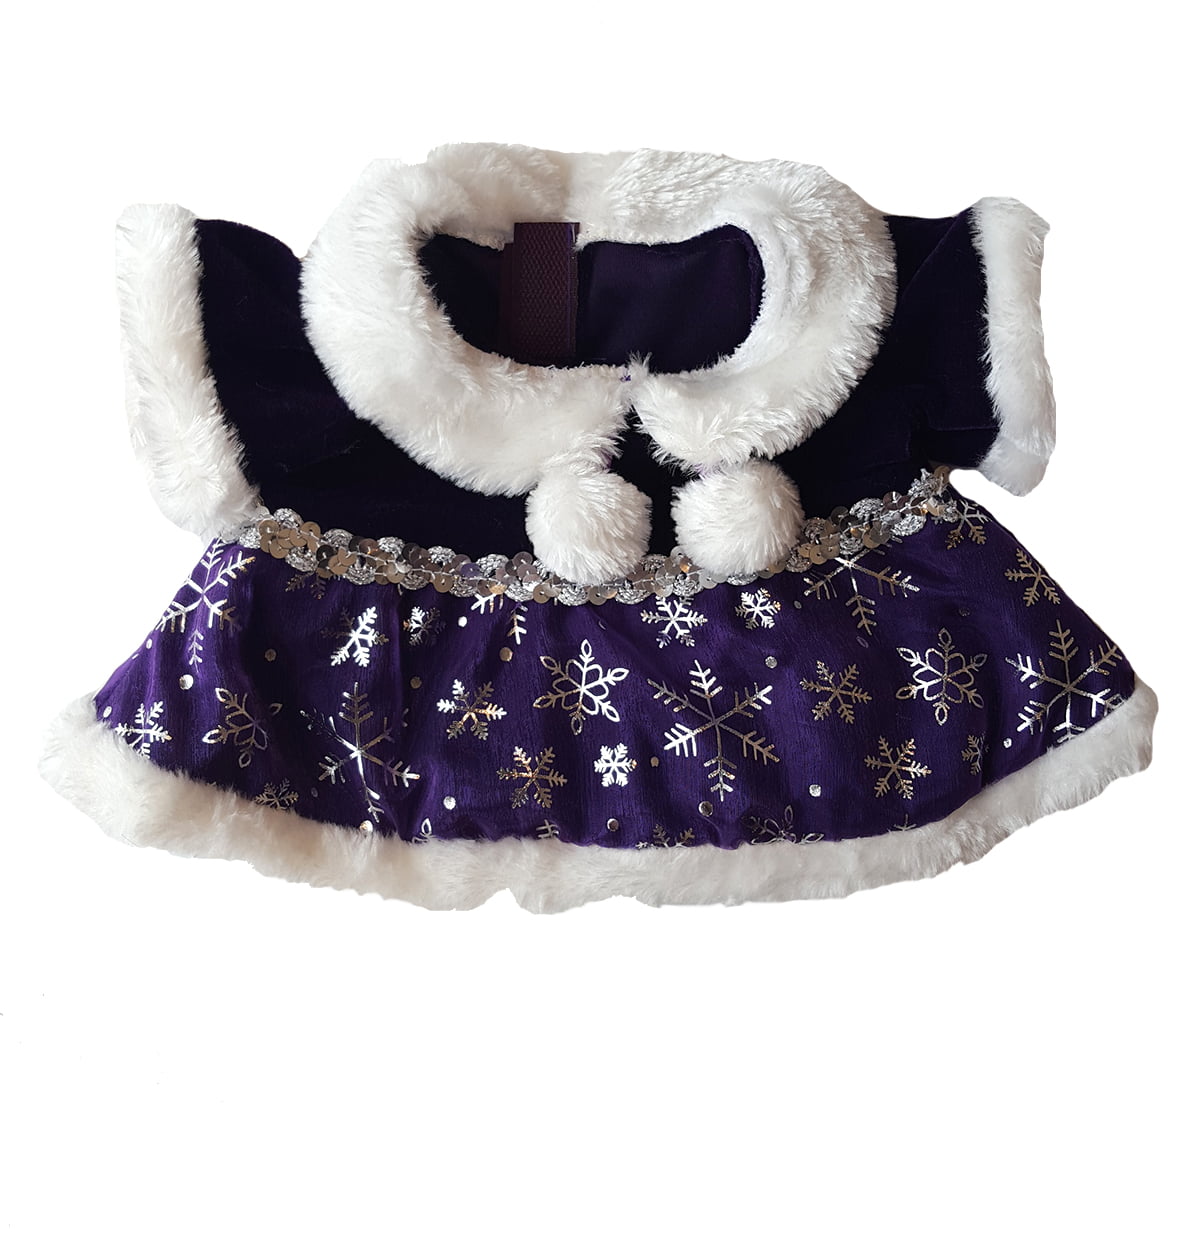 Purple Snowflake Dress Outfit Teddy Bear Clothes Fits Most 14-18 Build-a-bear and Make Your Own Stuffed Animals 